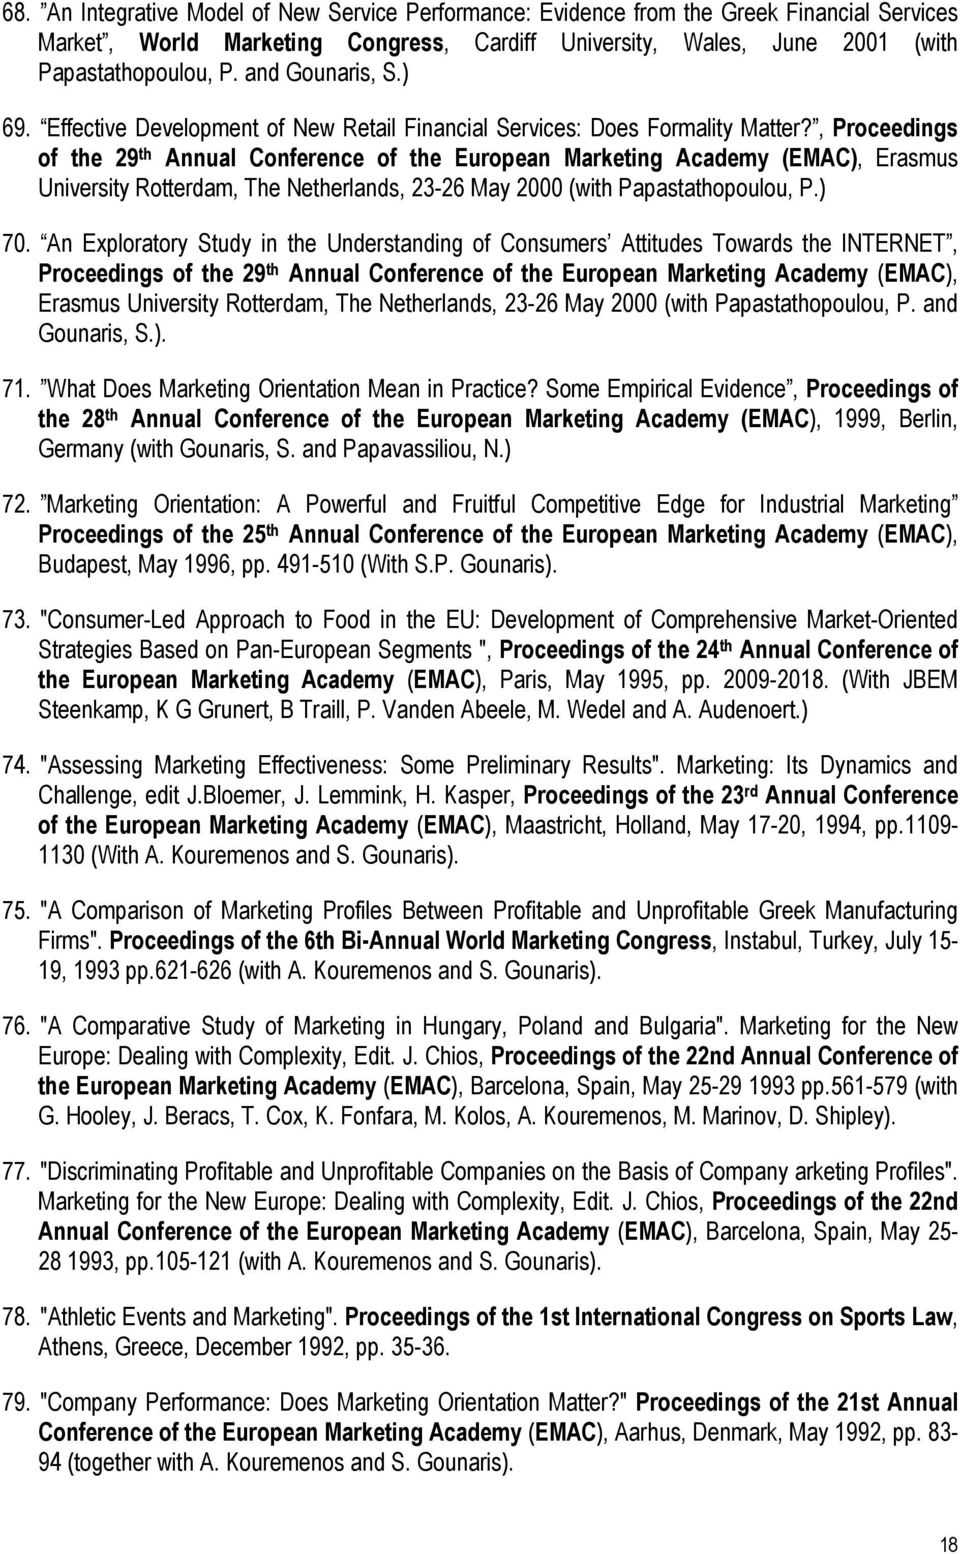 , Proceedings of the 29 th Annual Conference of the European Marketing Academy (EMAC), Erasmus University Rotterdam, The Netherlands, 23-26 May 2000 (with Papastathopoulou, P.) 70.